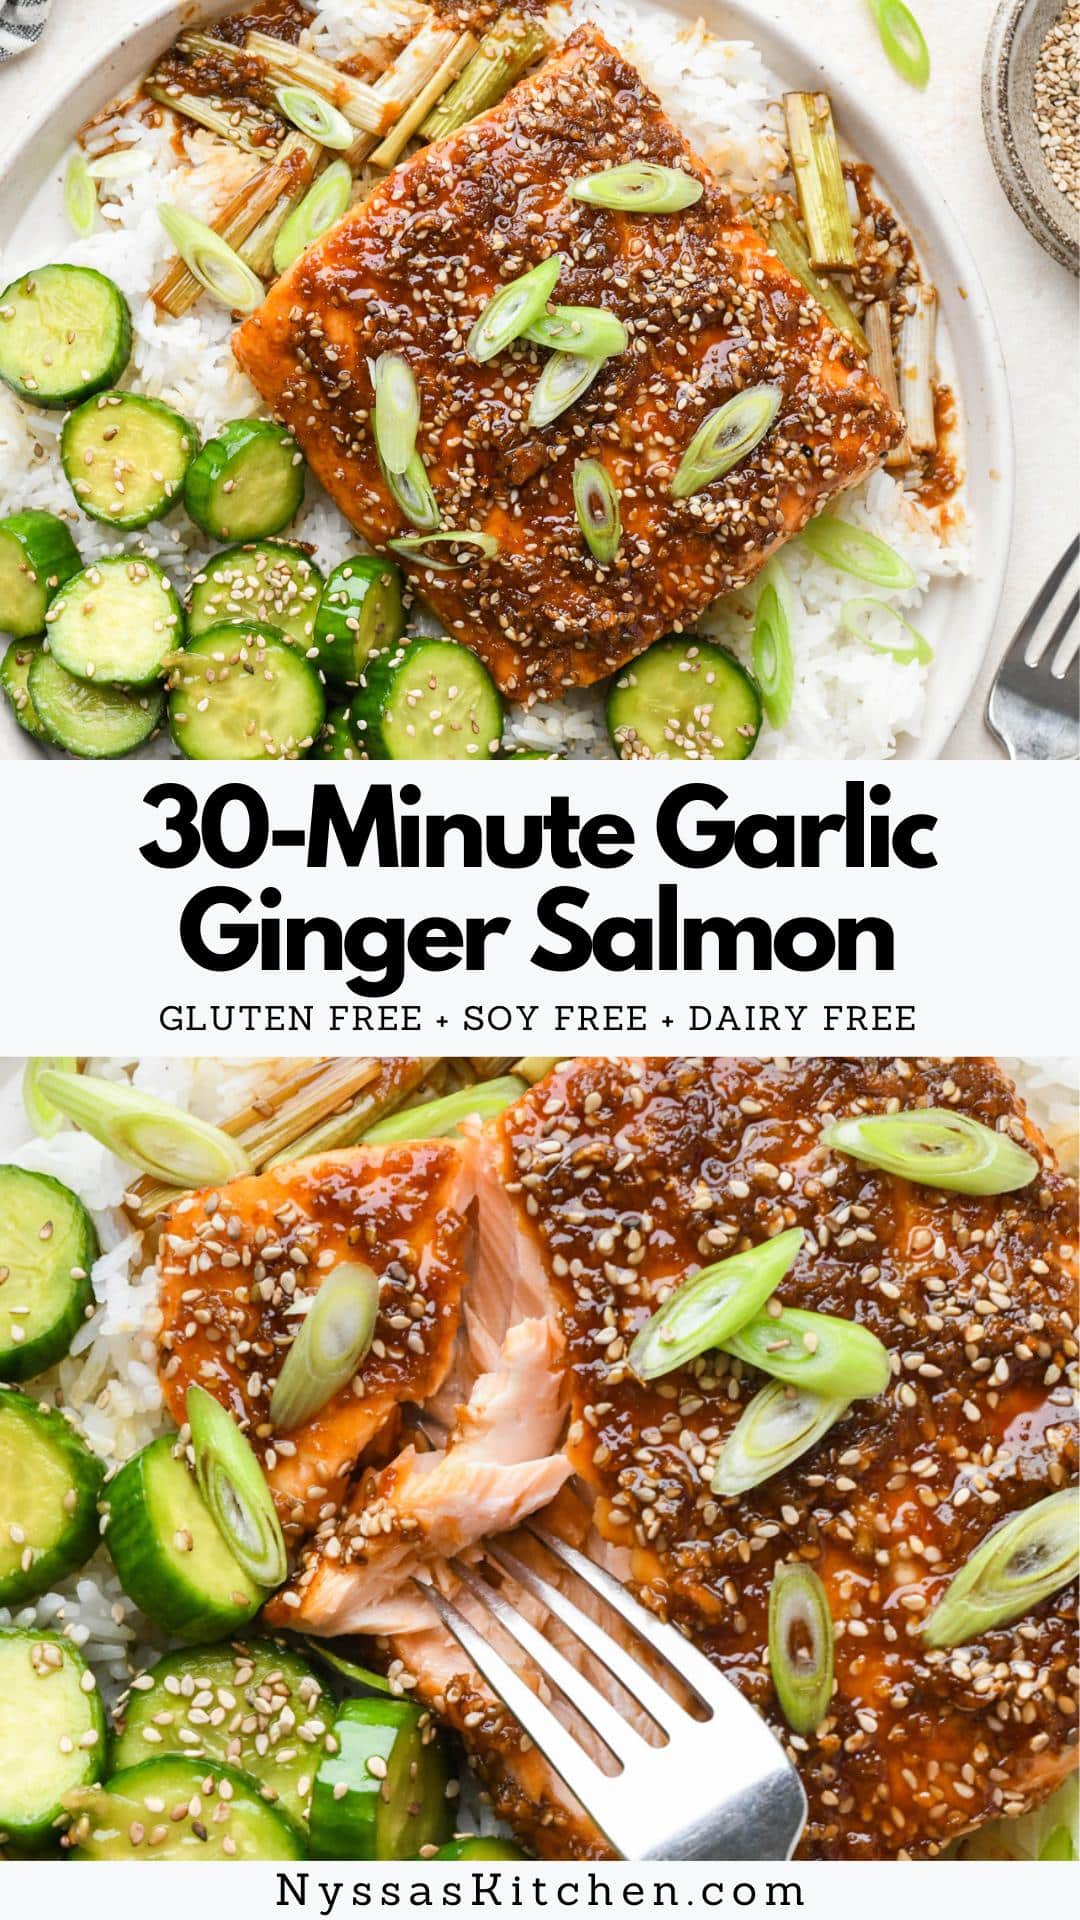 This 30-minute garlic ginger glazed salmon is the new easy salmon recipe you need in your weekly meal rotation! It comes together quickly (no marinade time!) and is made with just a handful of pantry staples. The recipe makes two servings but can easily be doubled to serve four. Gluten free, soy free, and naturally sweetened with a bit of honey!